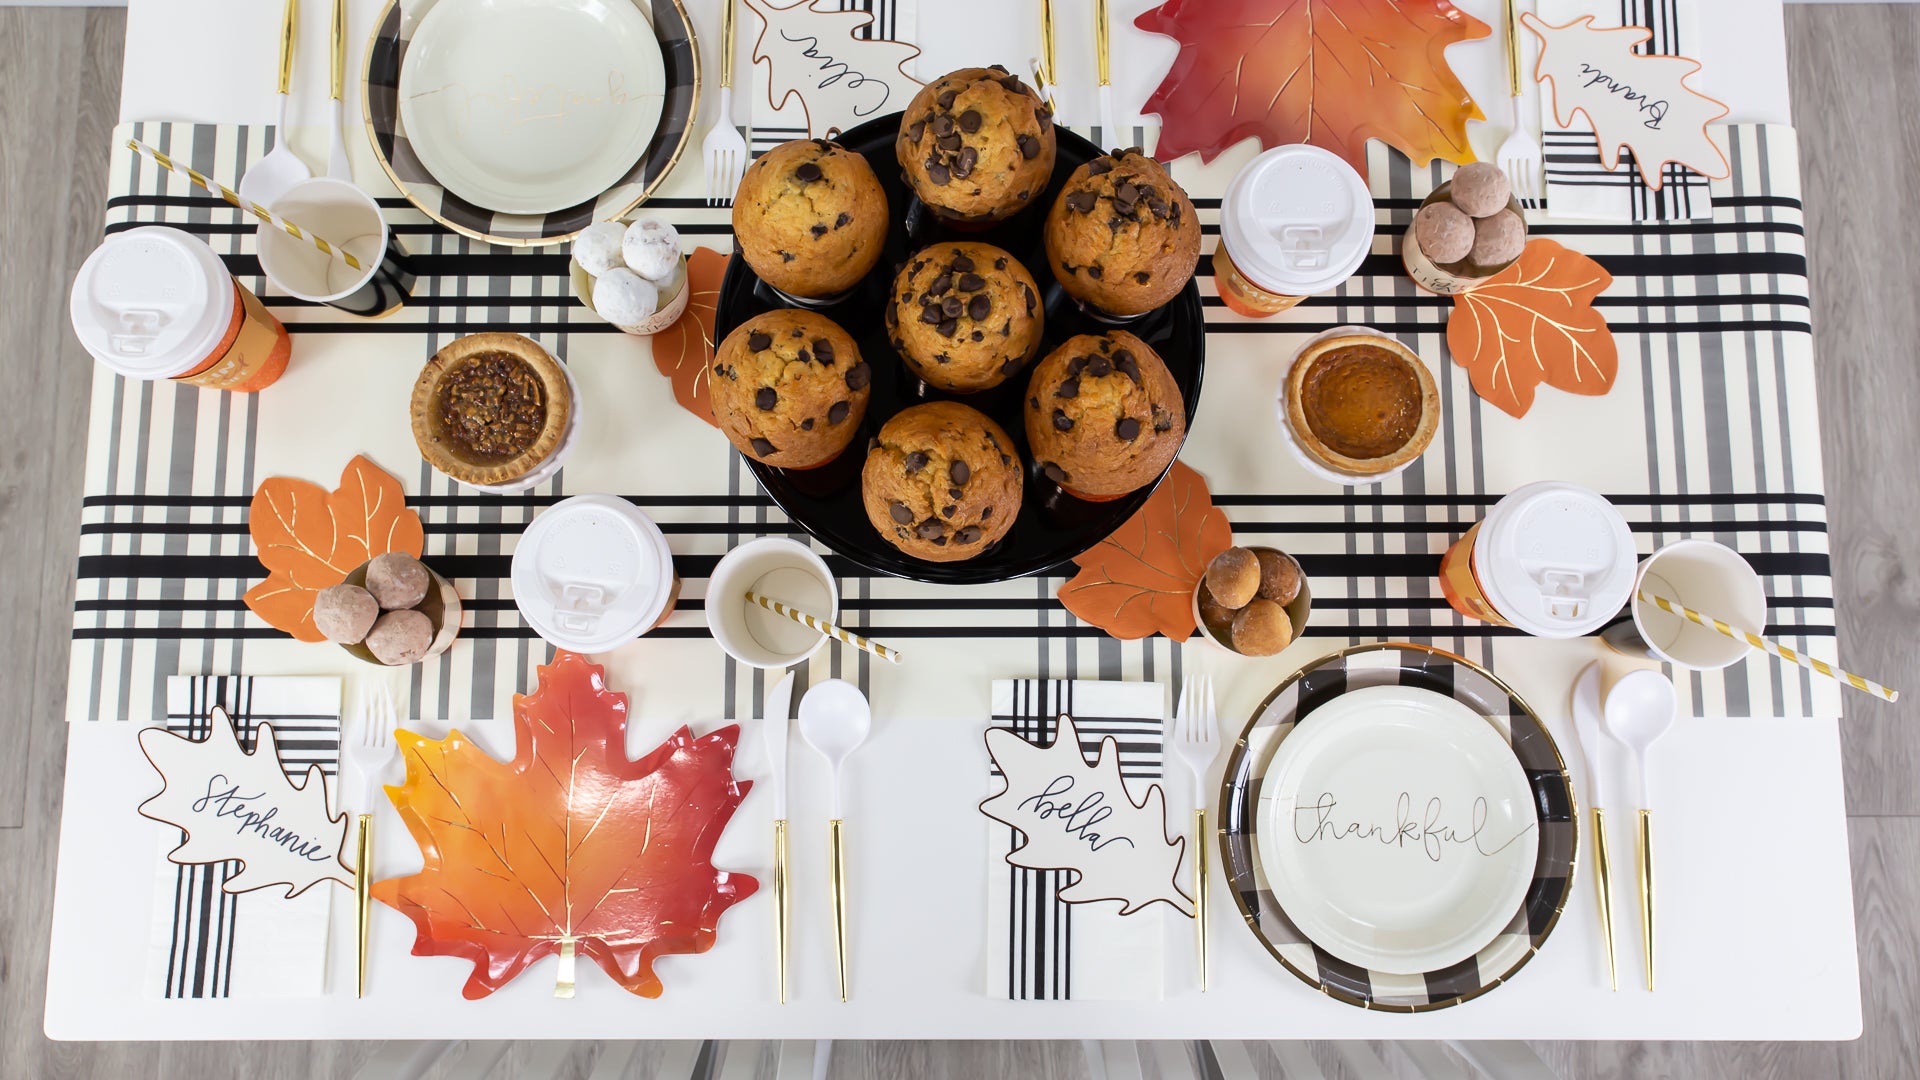 Stunning Gingham Fall Farmhouse Decorating Ideas for Brunch | The Party Darling